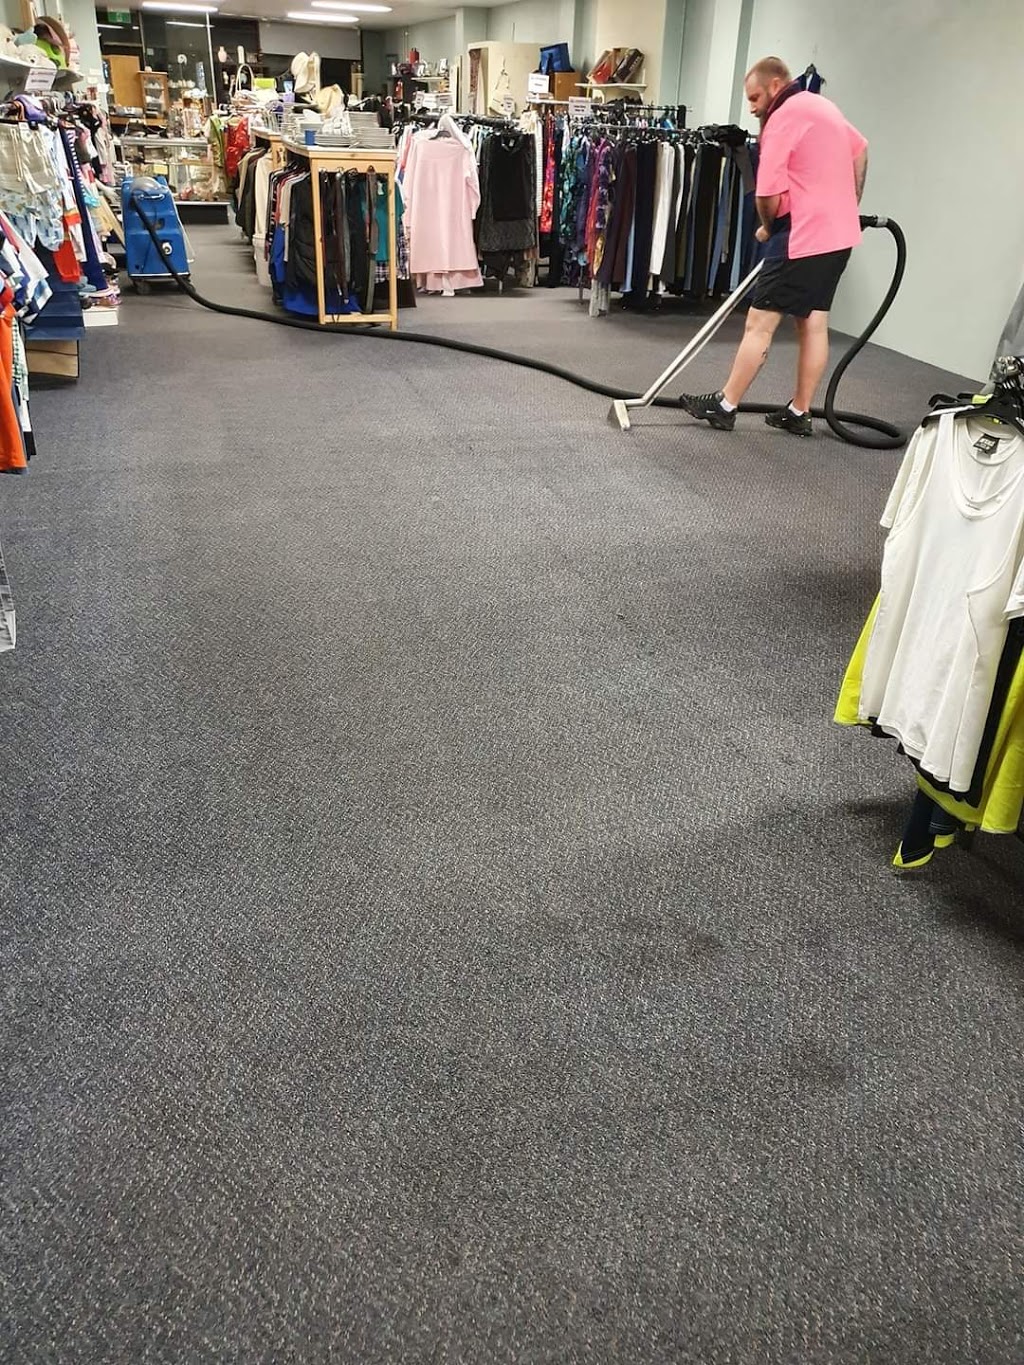 Harmers carpet cleaning lithgow | Bridge St, Lithgow NSW 2790, Australia | Phone: 0414 710 983